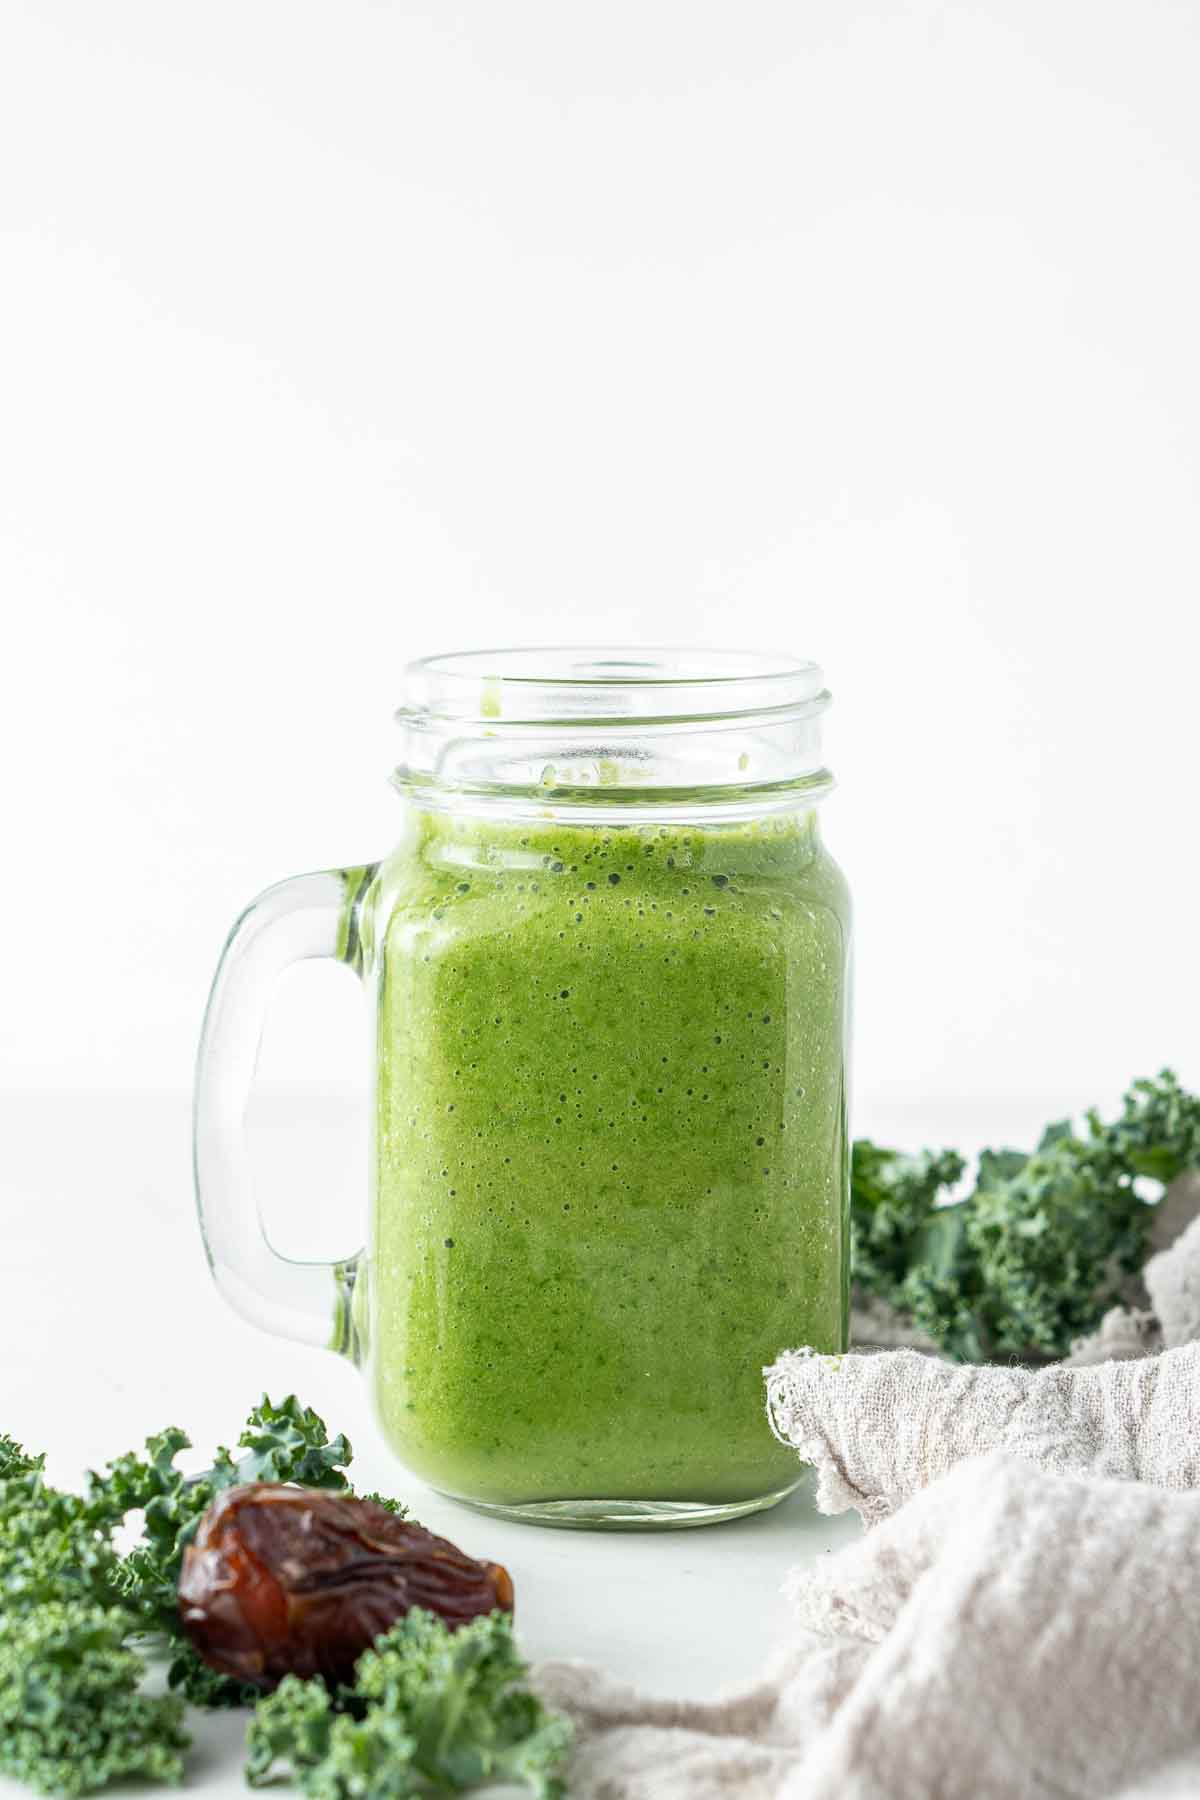 Mango and kale smoothie served in a glass with a handle.